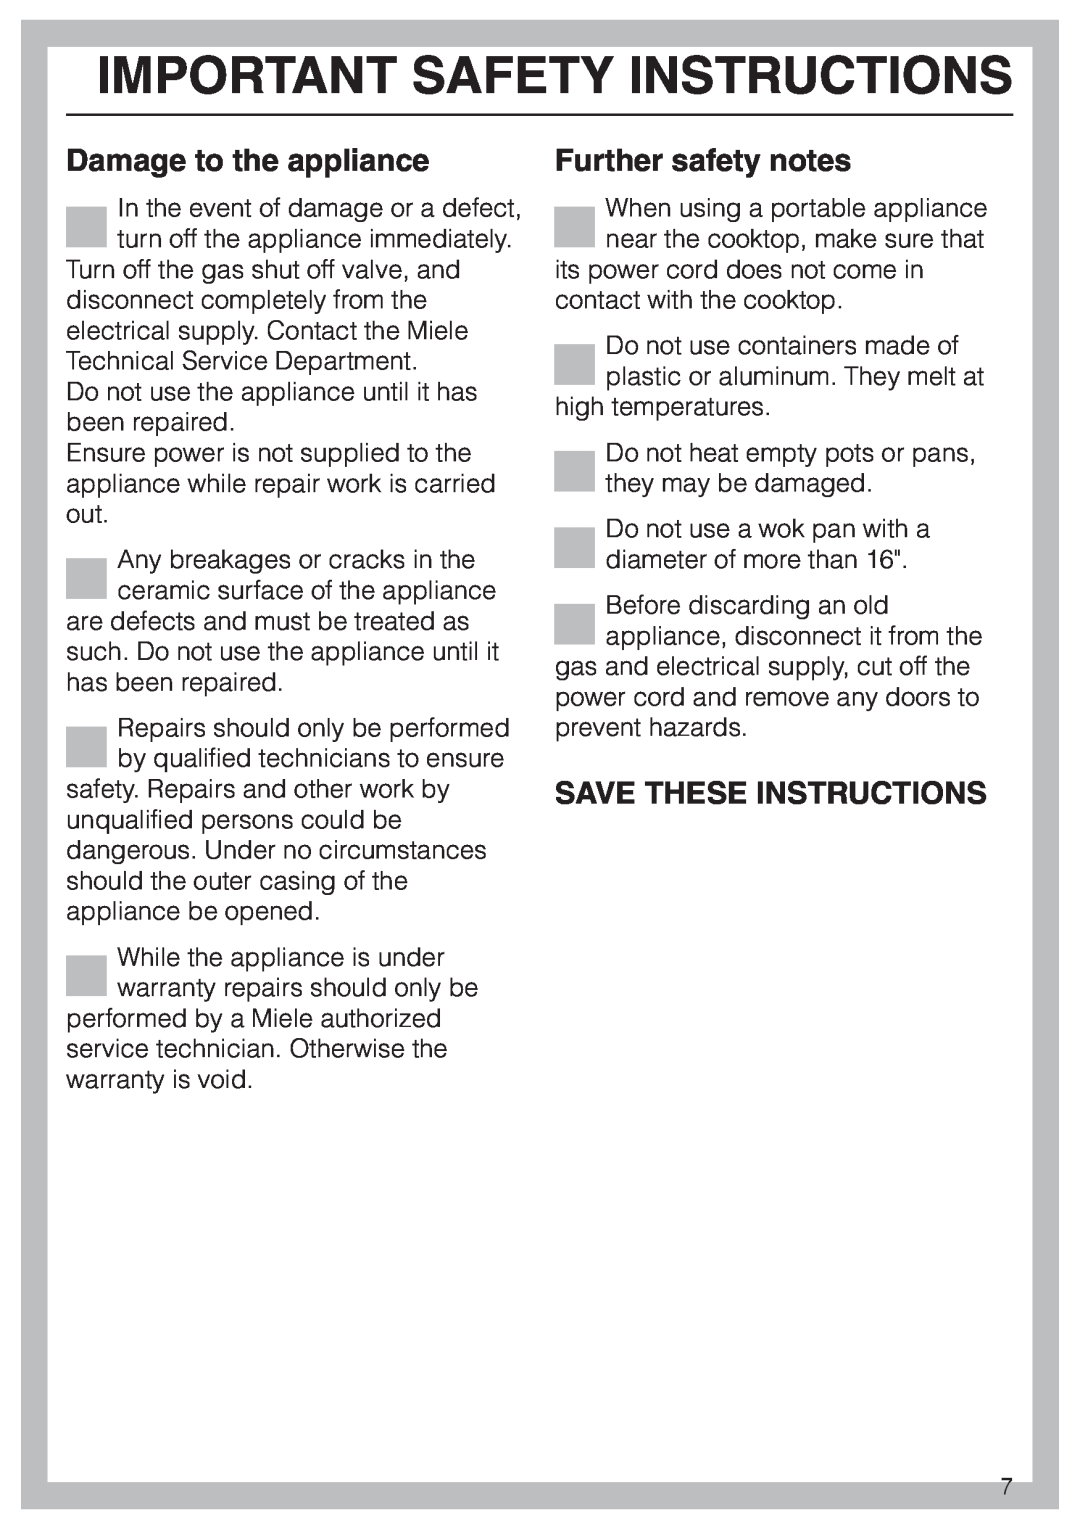 Miele KM 406 manual Damage to the appliance, Further safety notes, Save These Instructions, Important Safety Instructions 